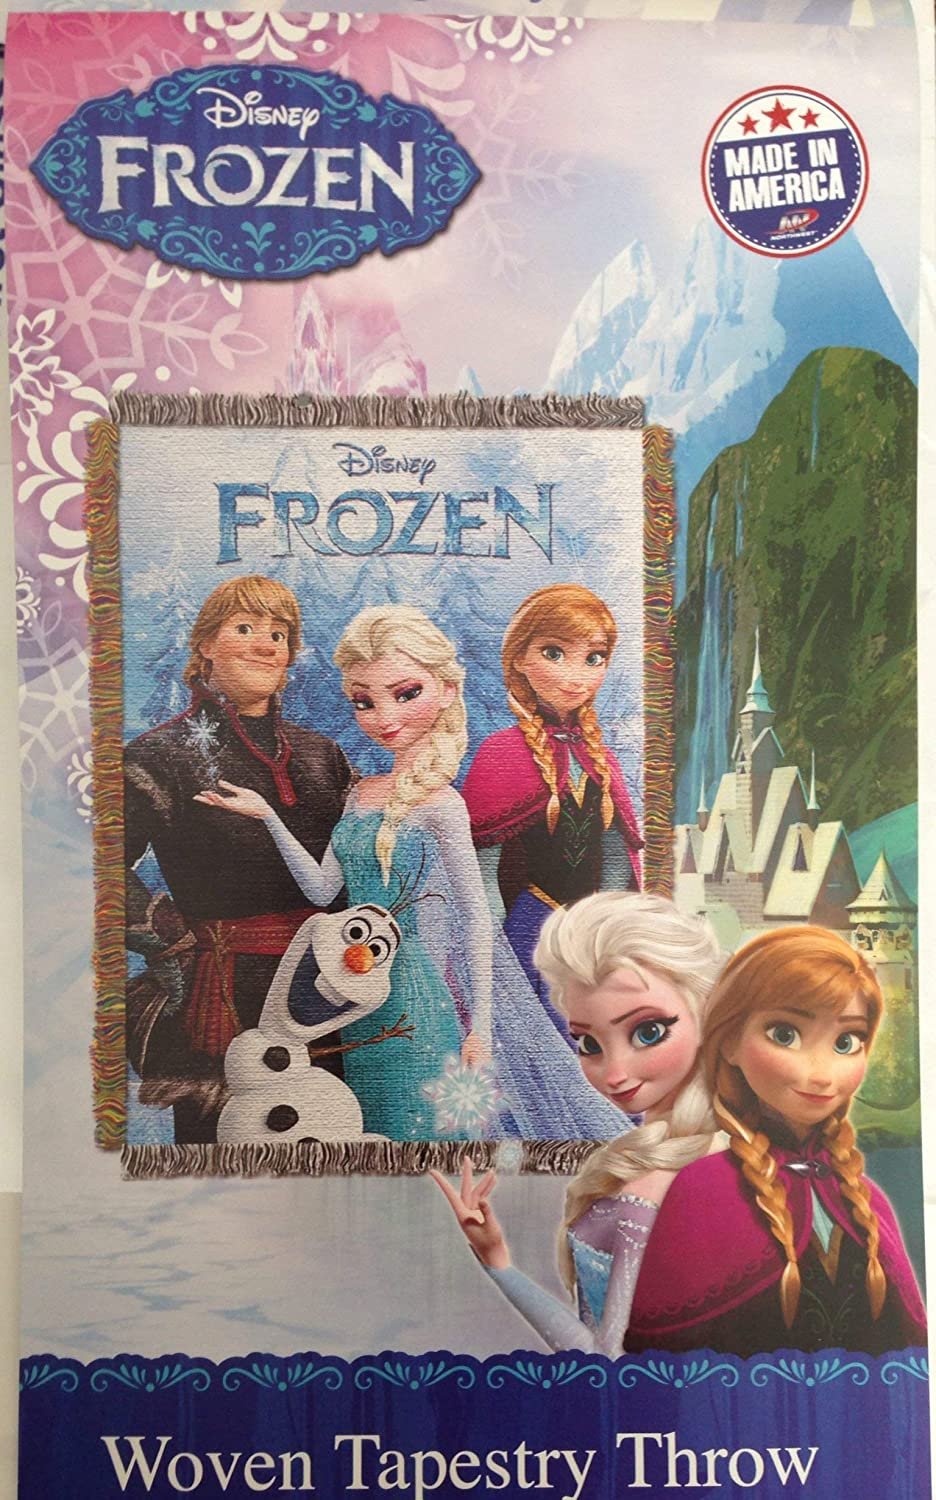 Disney Frozen Tapestry Throw Blanket, 48x60, Multicolor, Polyester, Machine Wash, 1 Each - image 2 of 4